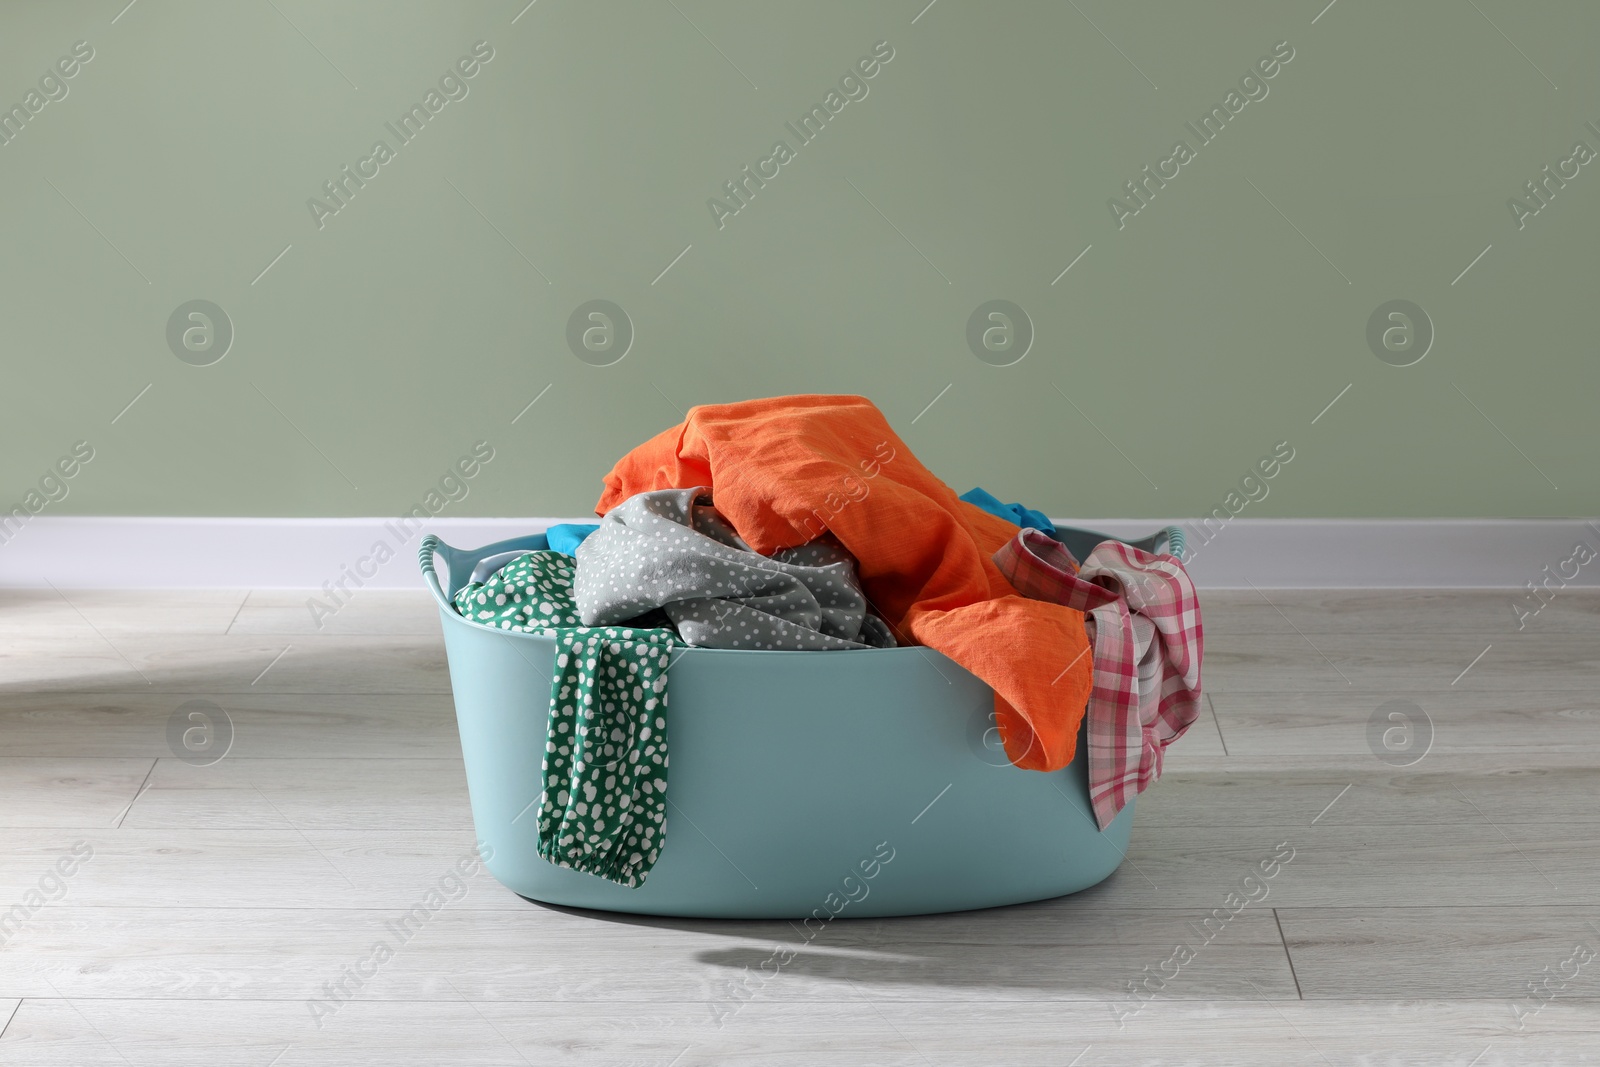 Photo of Laundry basket with clothes near light green wall indoors